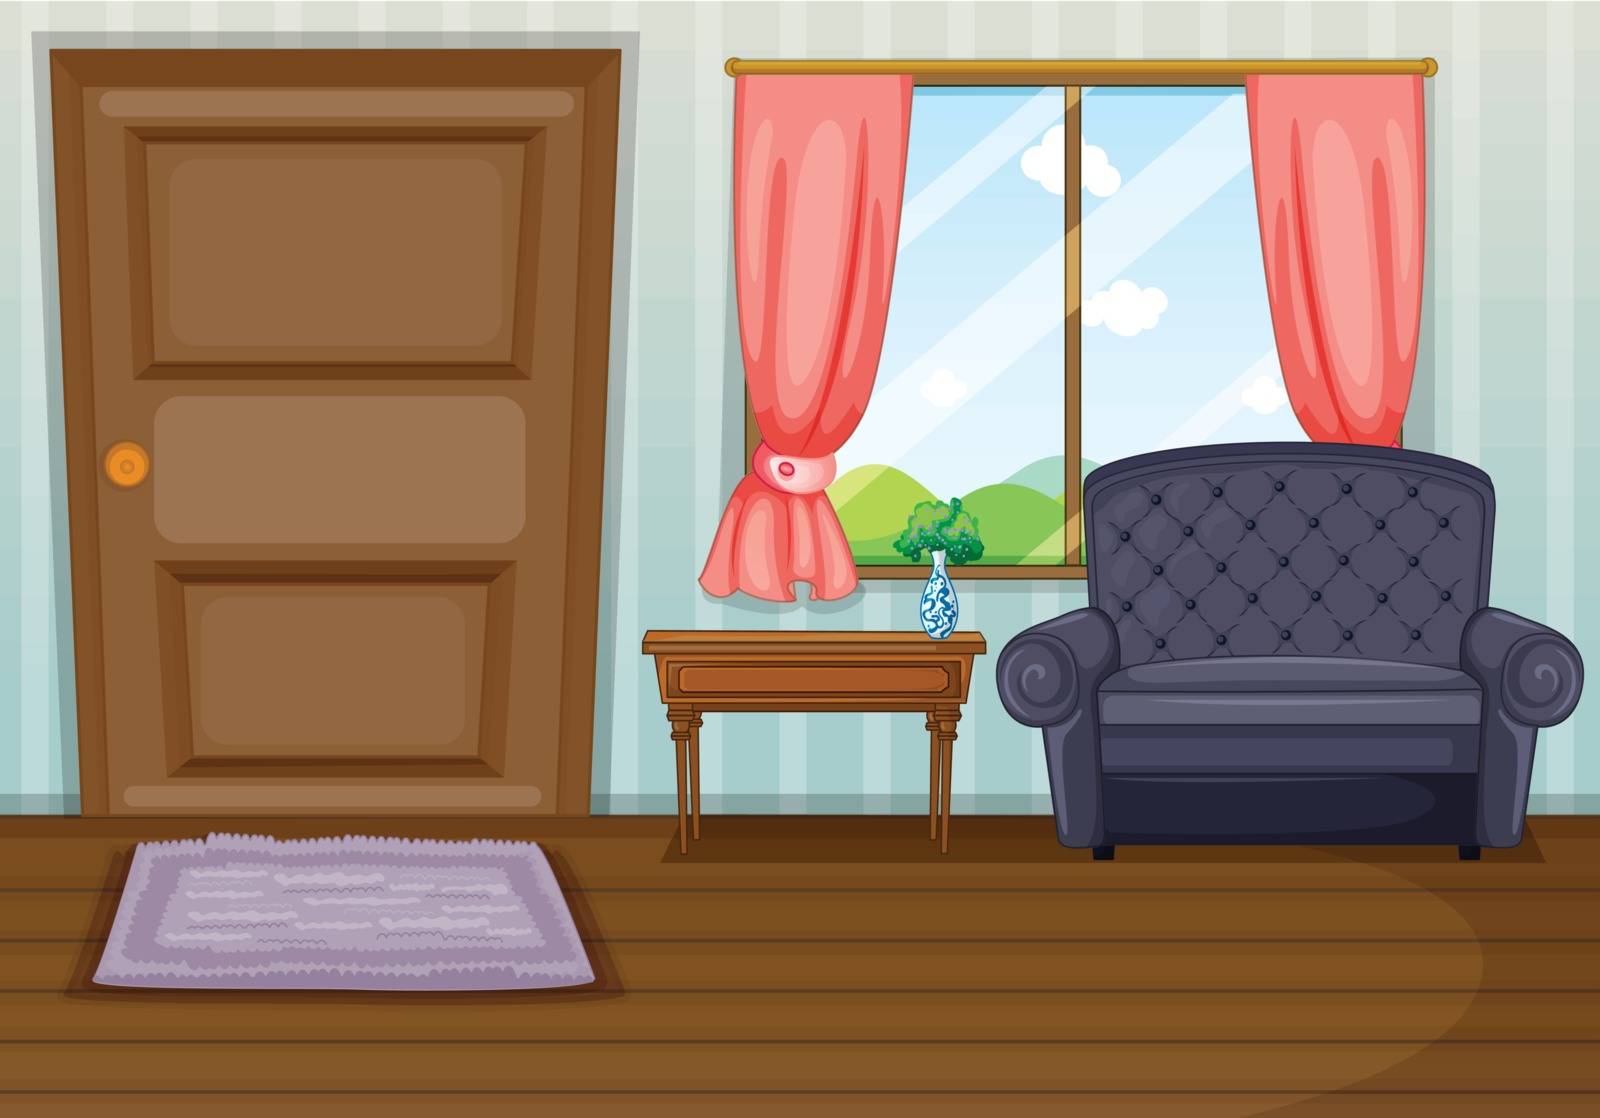 Illustration of a clean living room